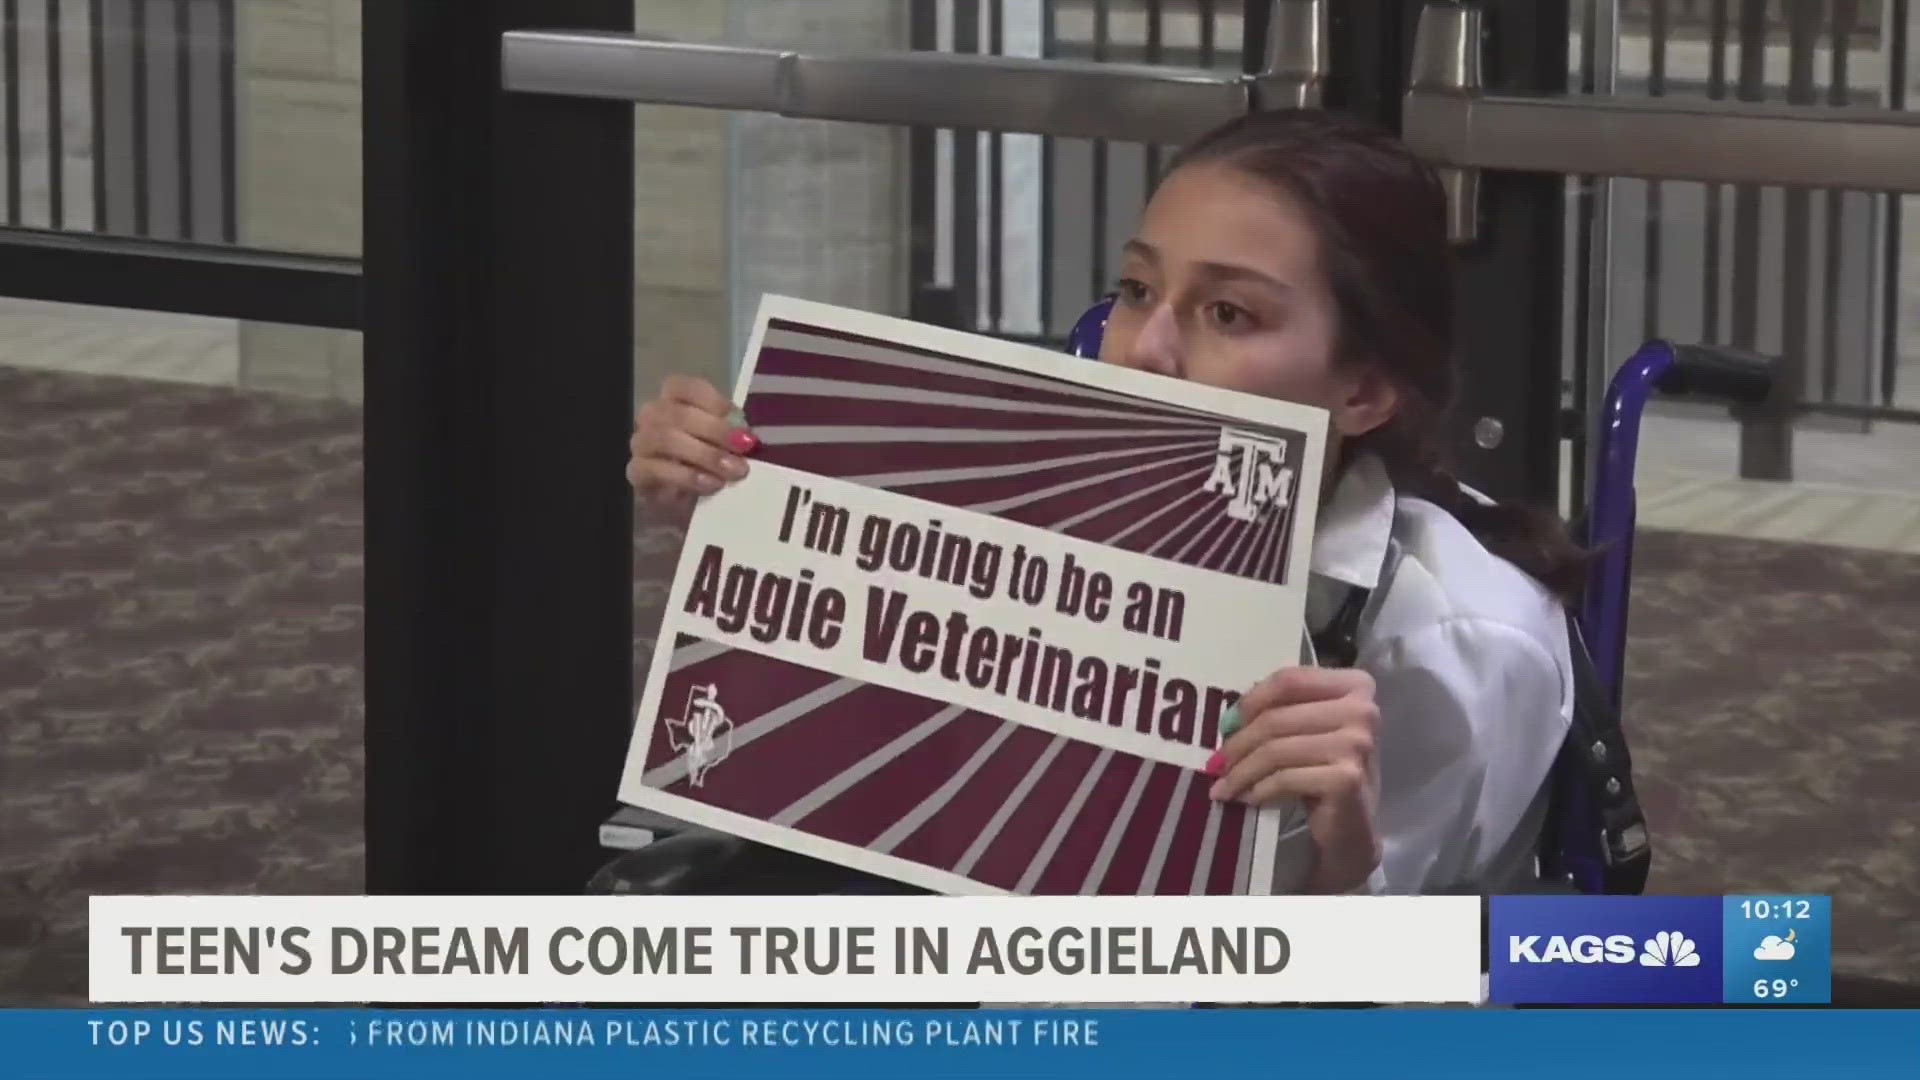 13-year-old Gabby Zarate and her family traveled from Rio Grande City to College Station to experience what it's like to be an official Aggie veterinarian.